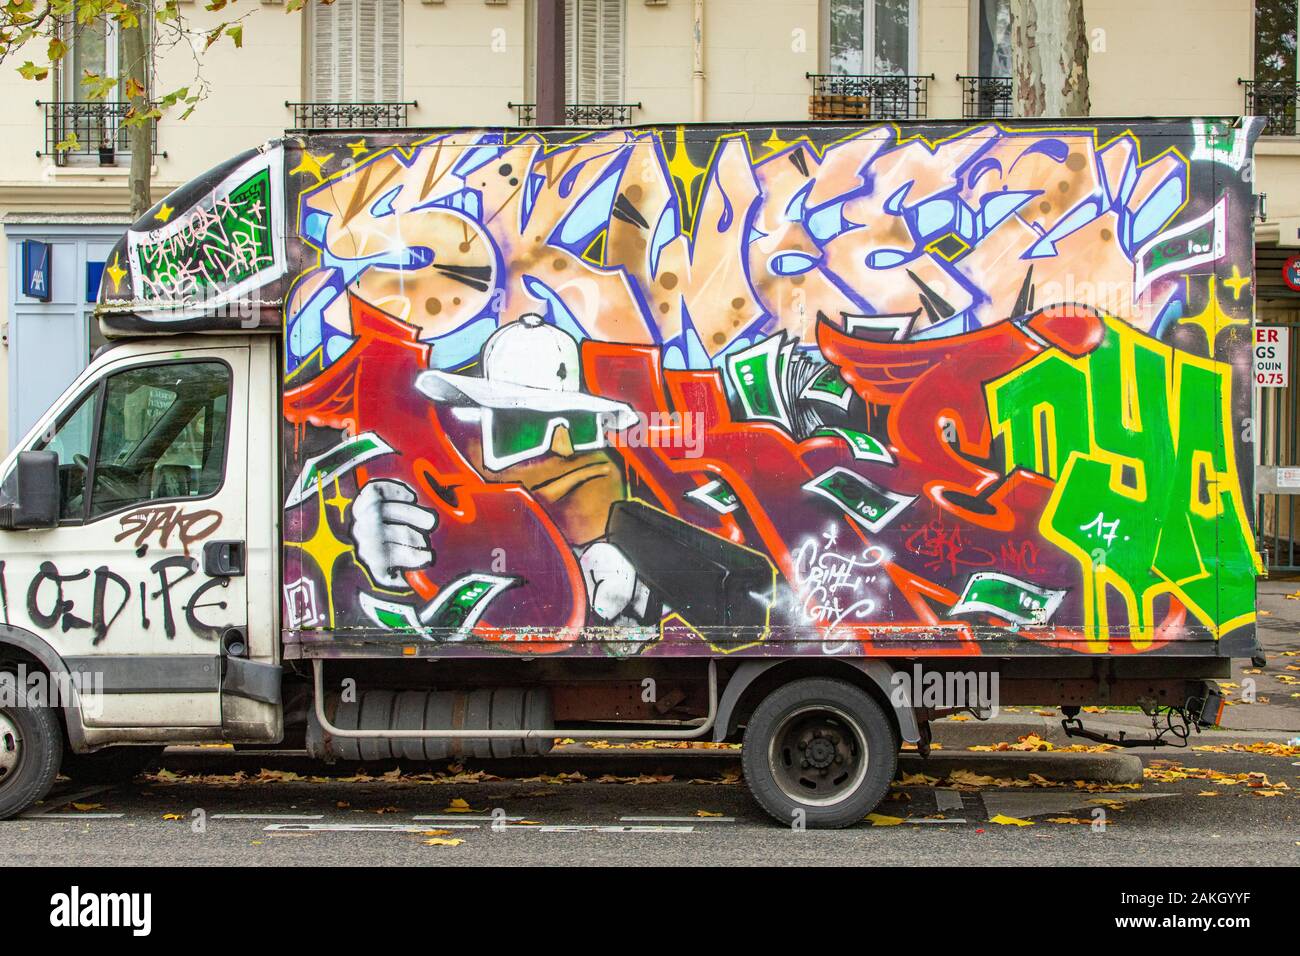 France, Paris, truck tagged in street art Stock Photo